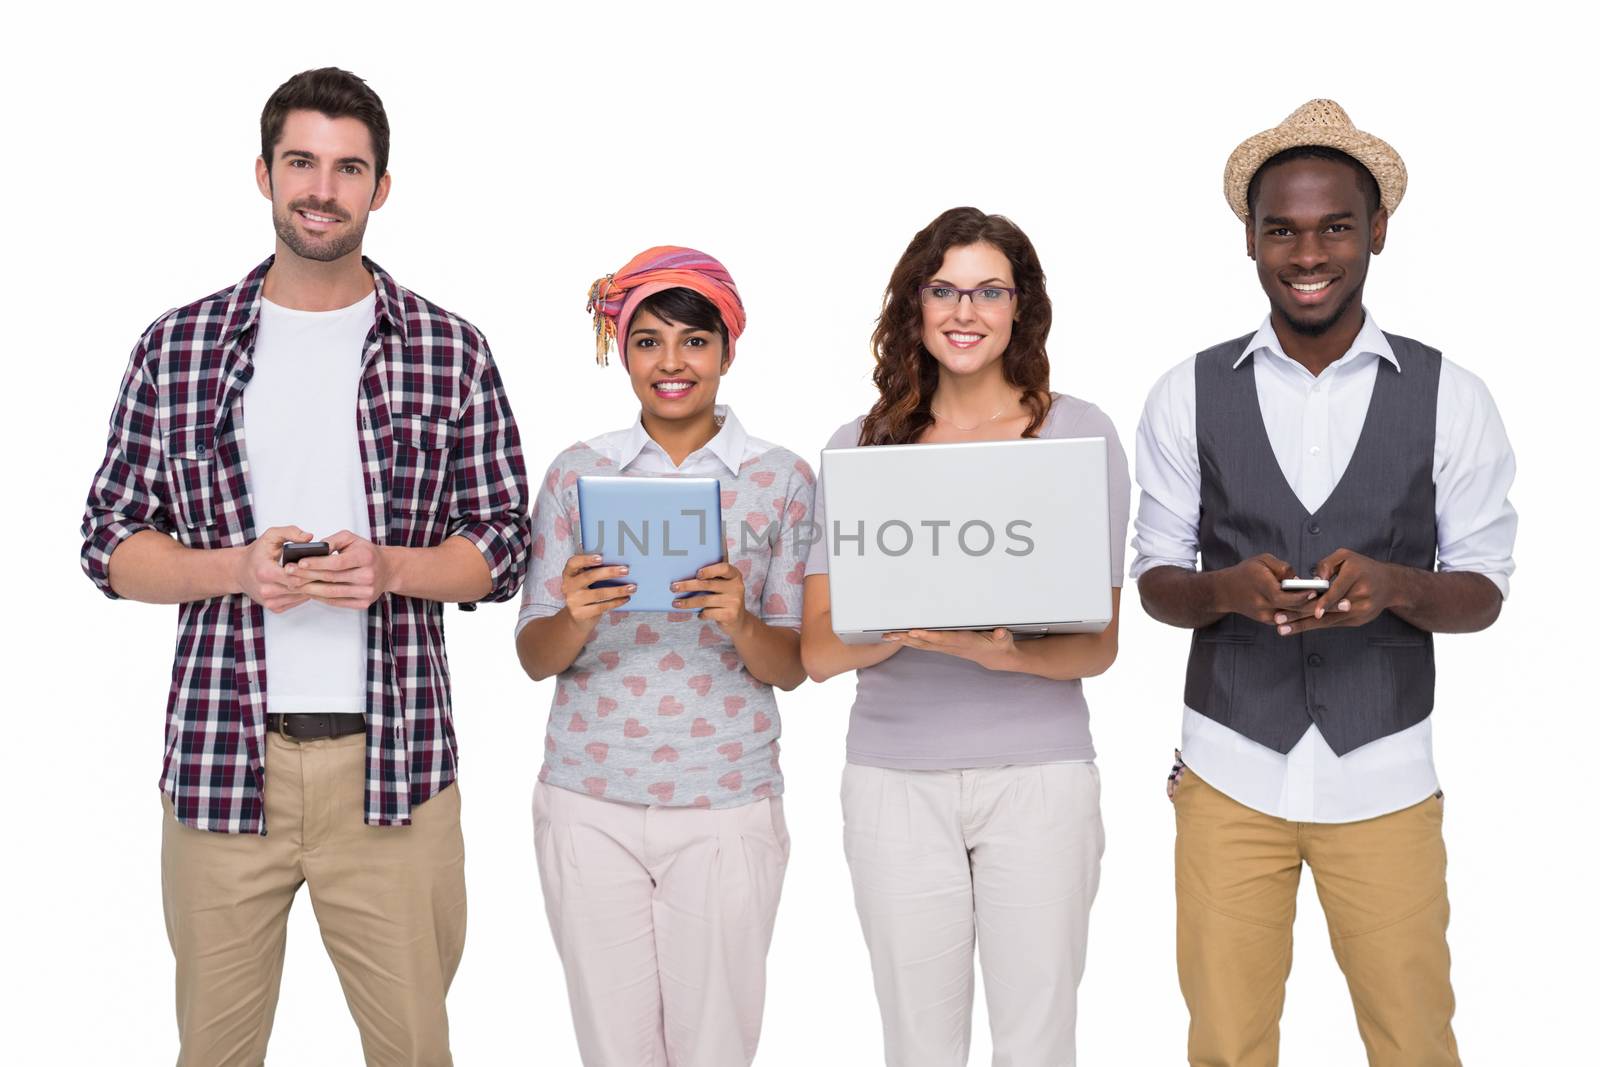 Smiling coworkers with technology posing on white background